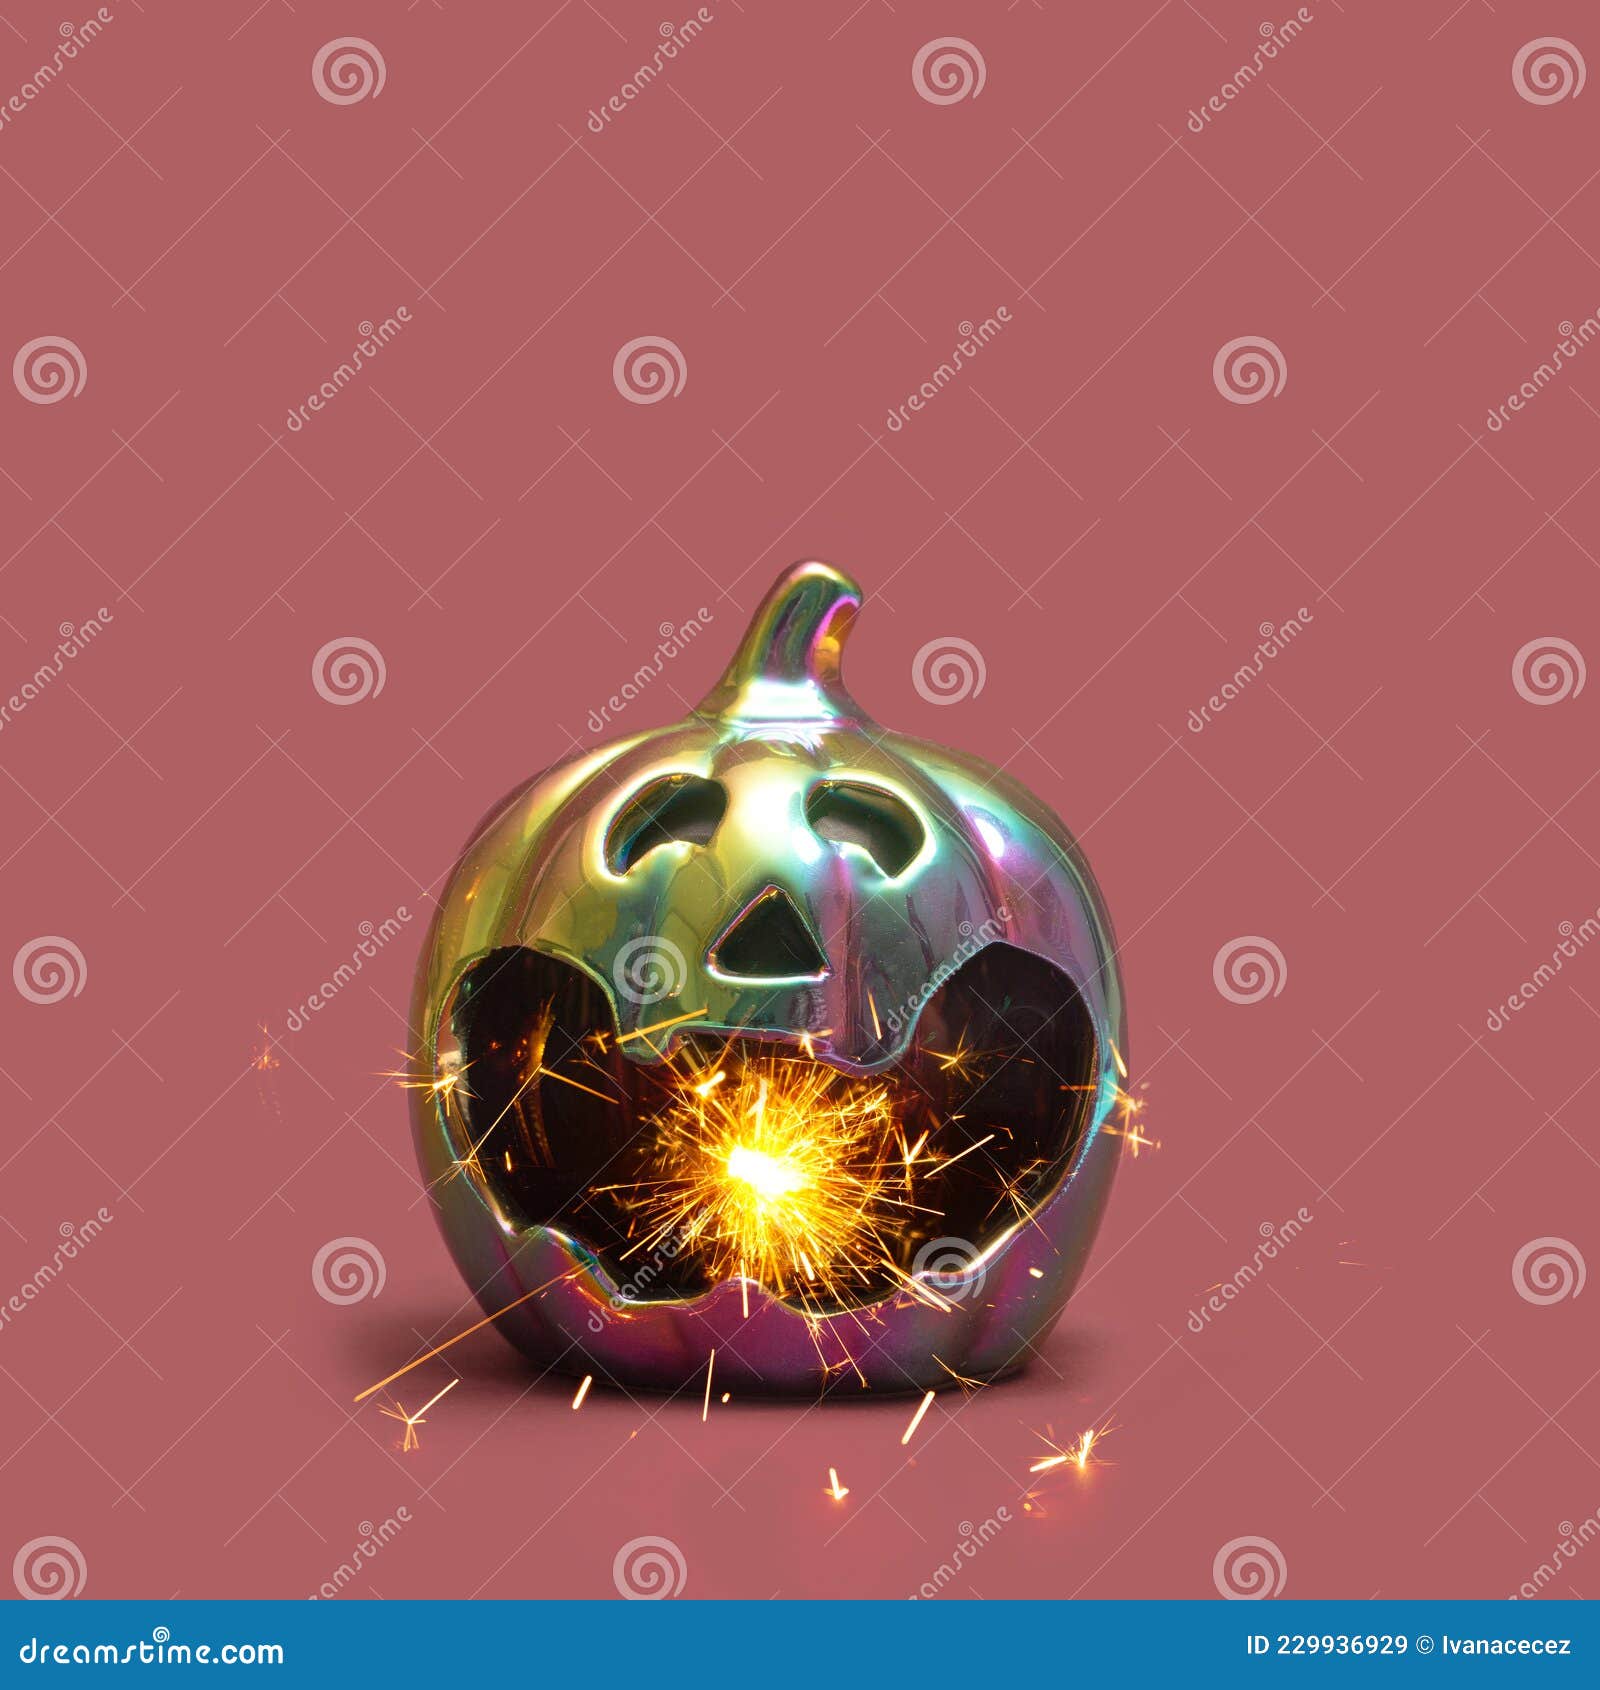 cyberpunk halloween neon looking halloween pumpkin with miracle candle magic firing out of mouth. minimal pink red background